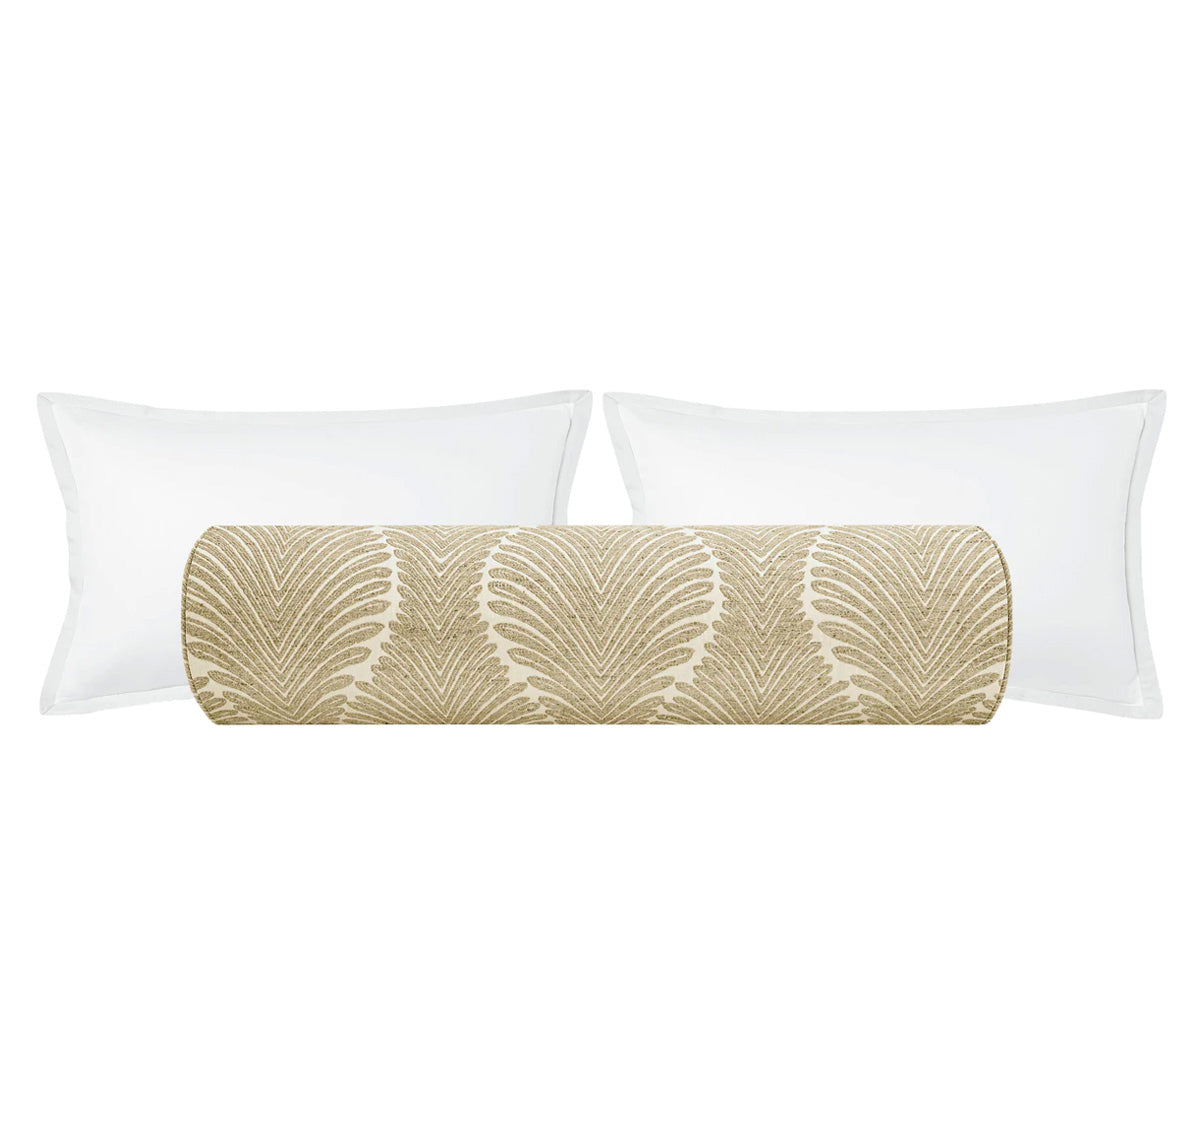 THE BOLSTER :: MUSGROVE CHENILLE // NATURAL